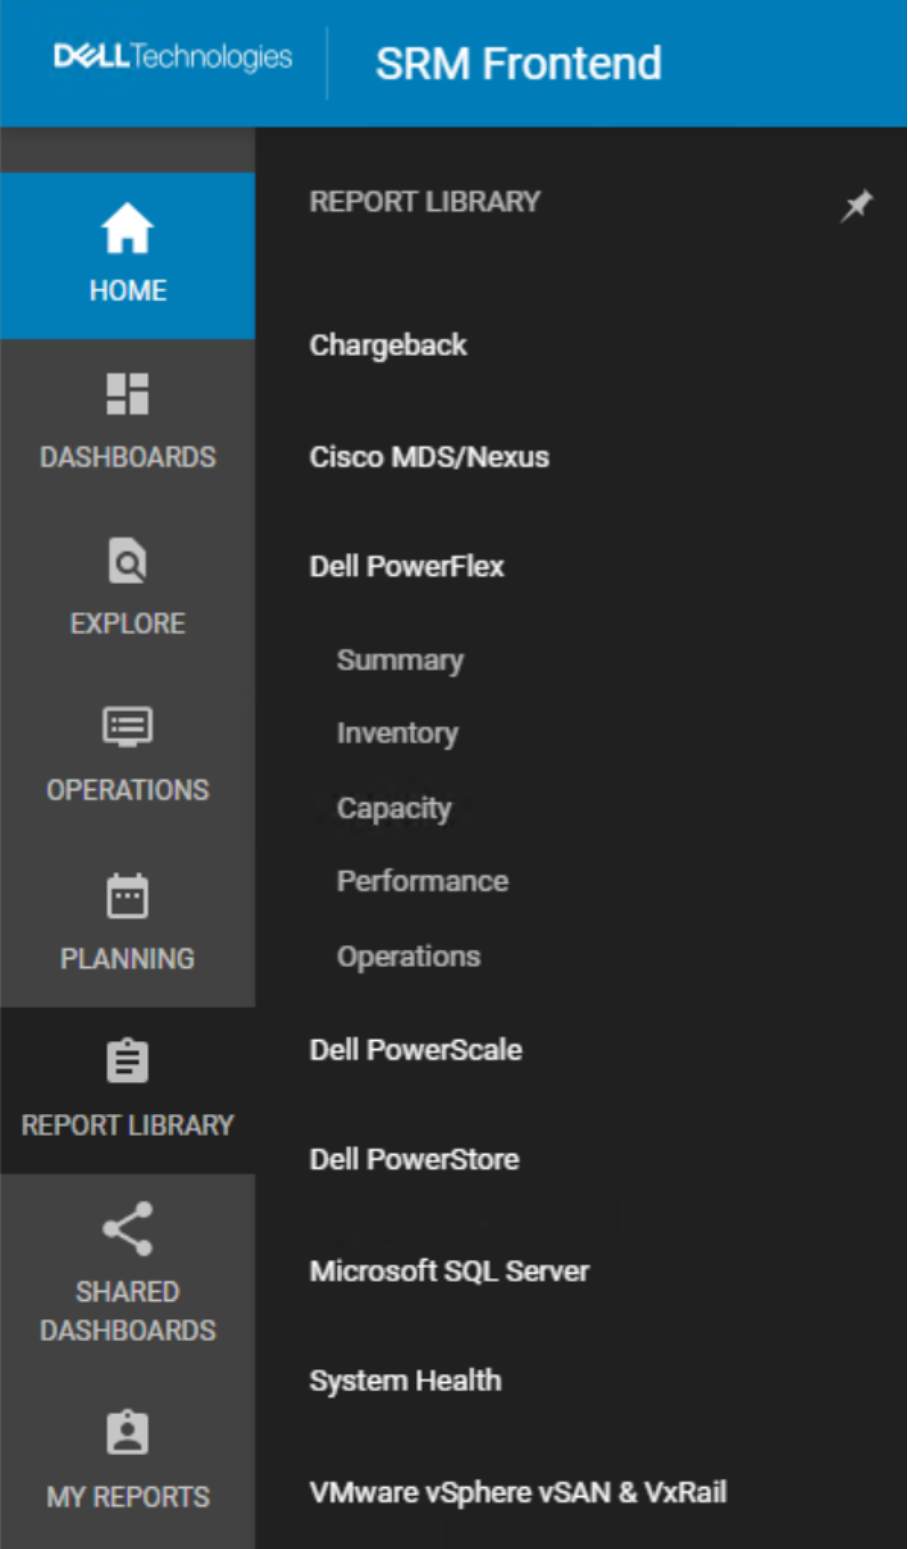 A screenshot of the PowerFlex report library menu in the SRM user interface.